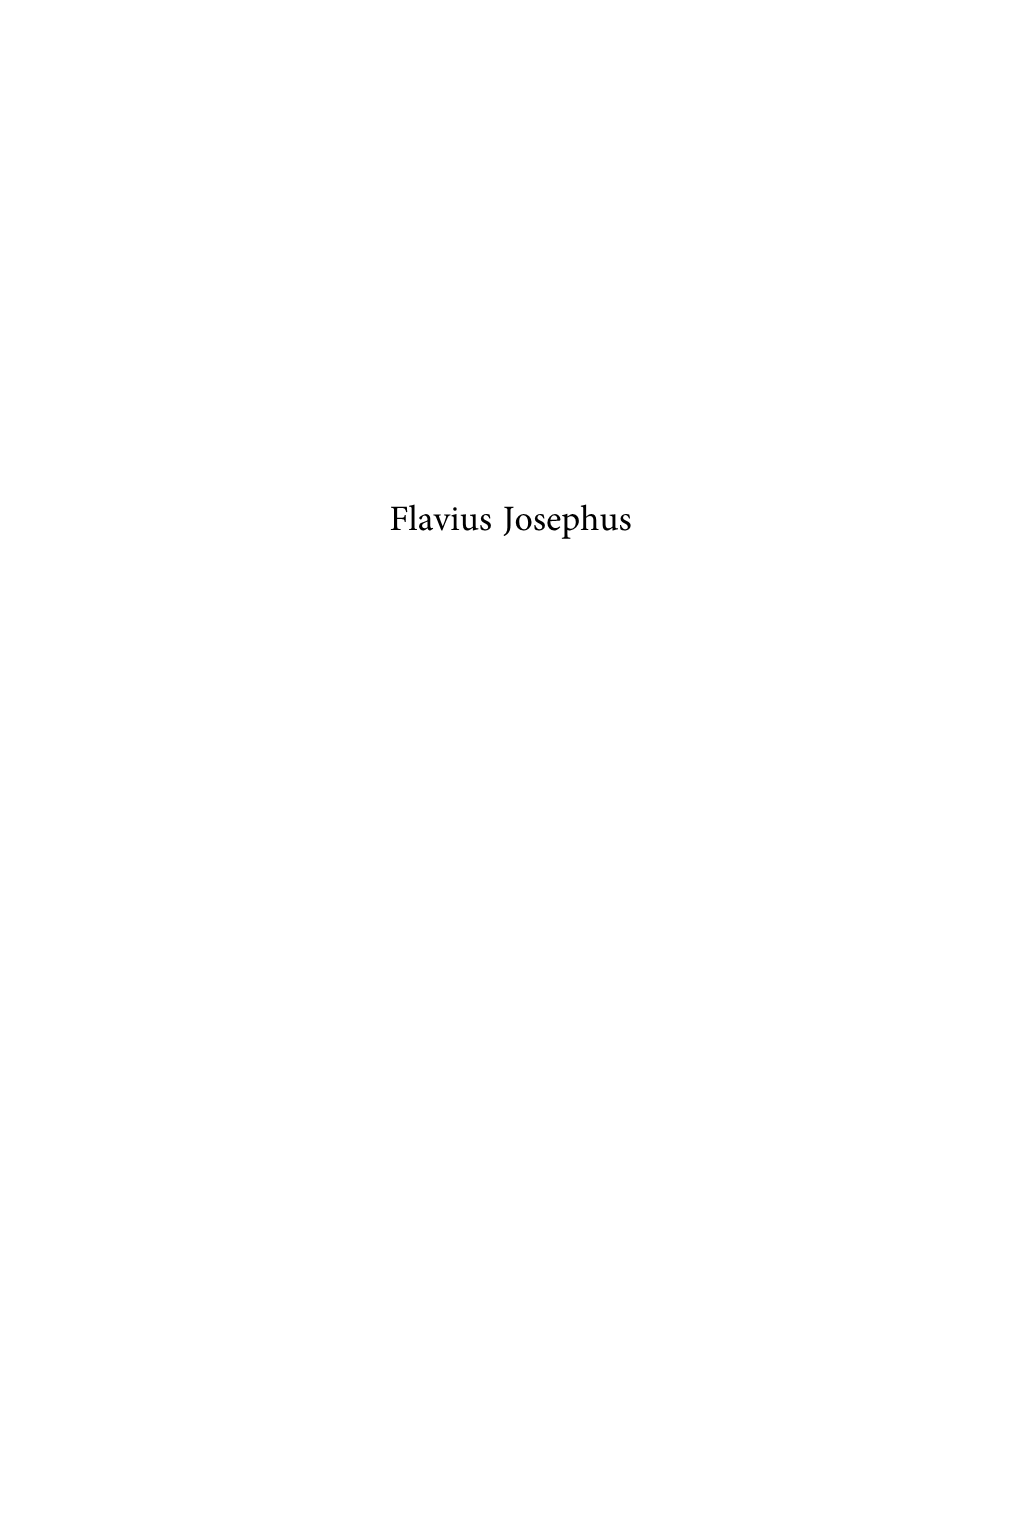 Flavius Josephus Supplements to the Journal for the Study of Judaism